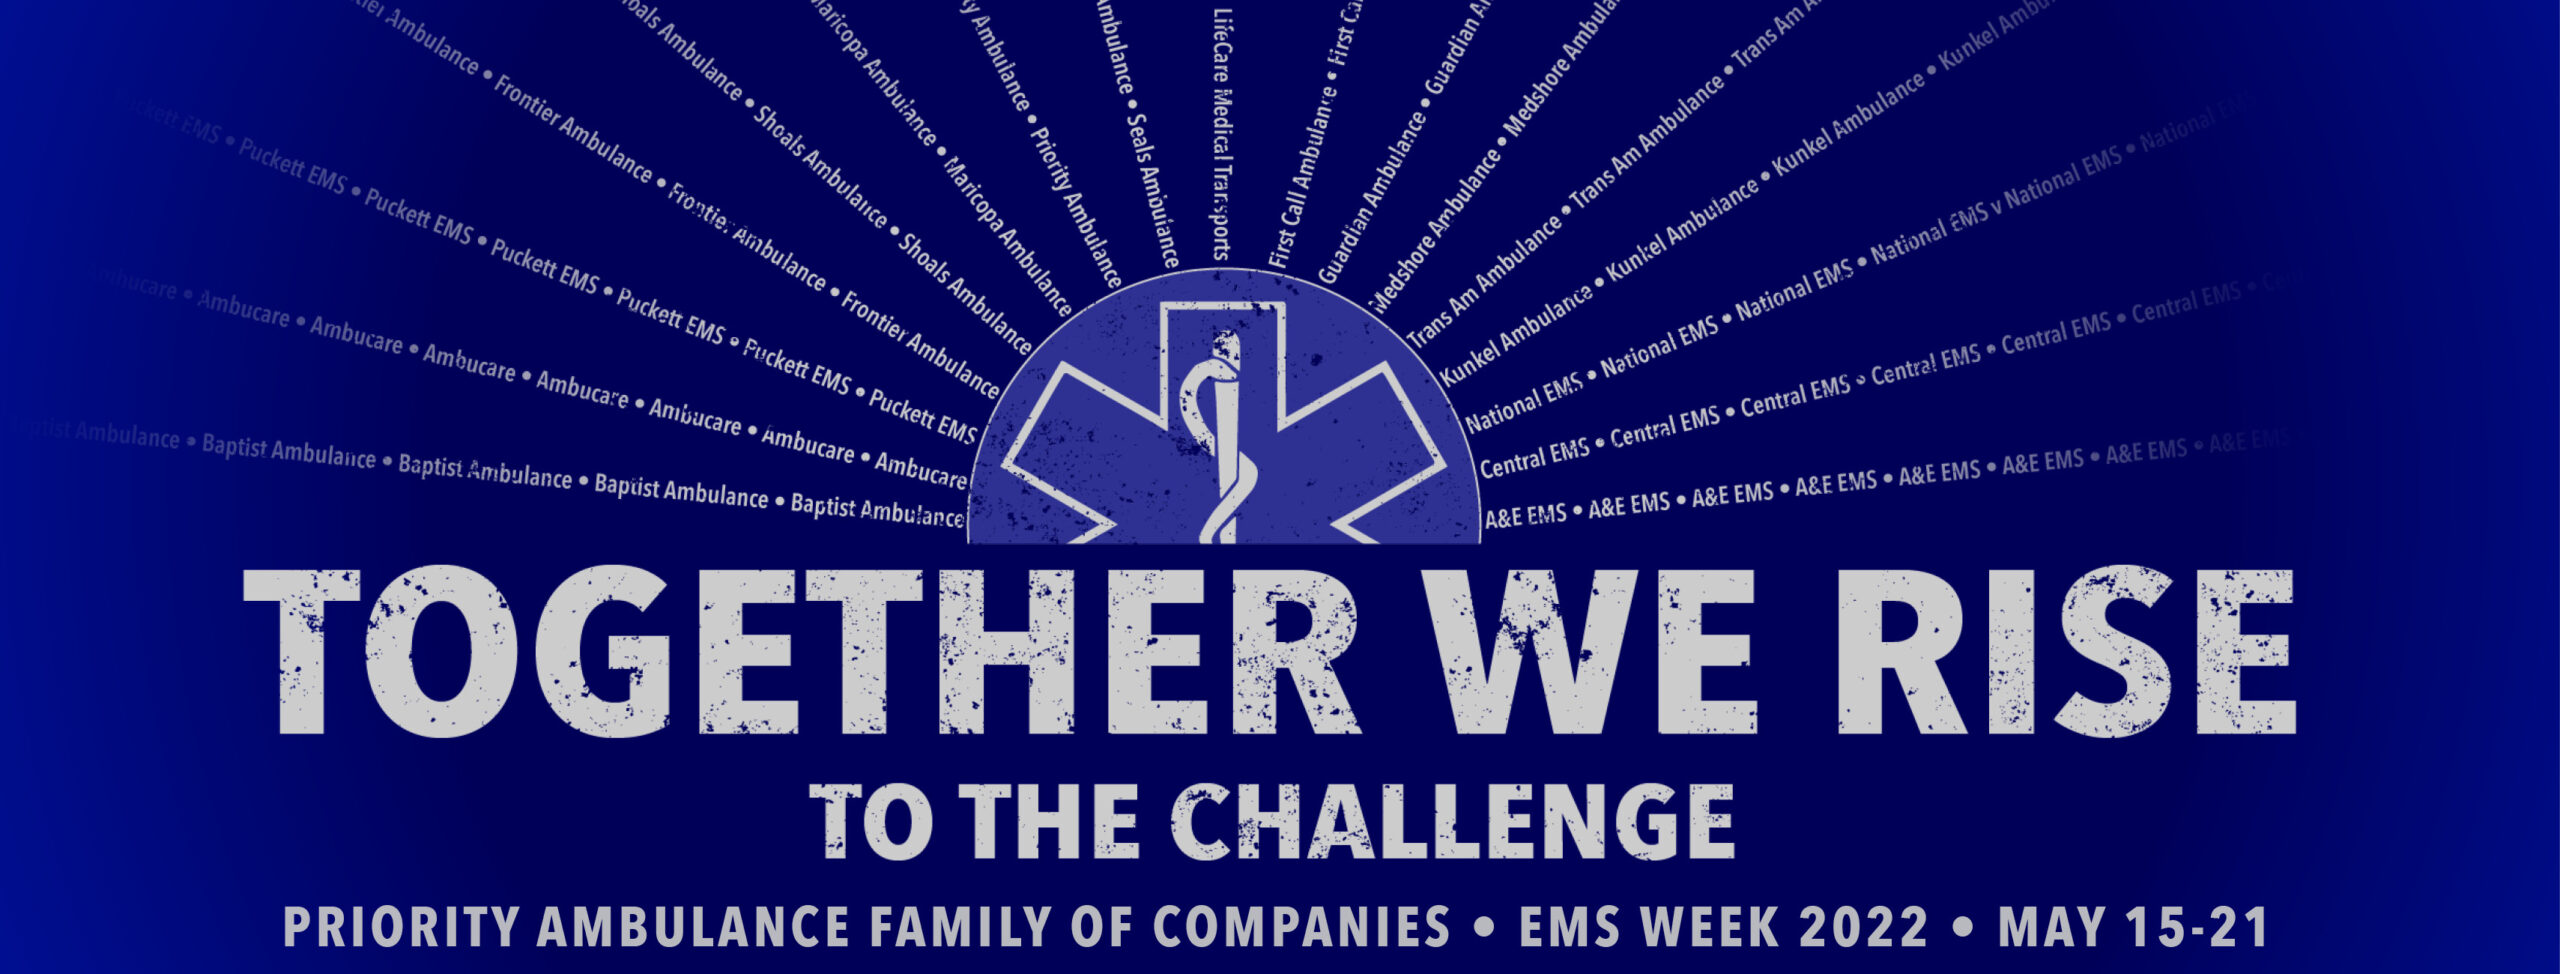 Featured image for “Priority Ambulance Family of Companies highlights team members who “Rise to the Challenge””